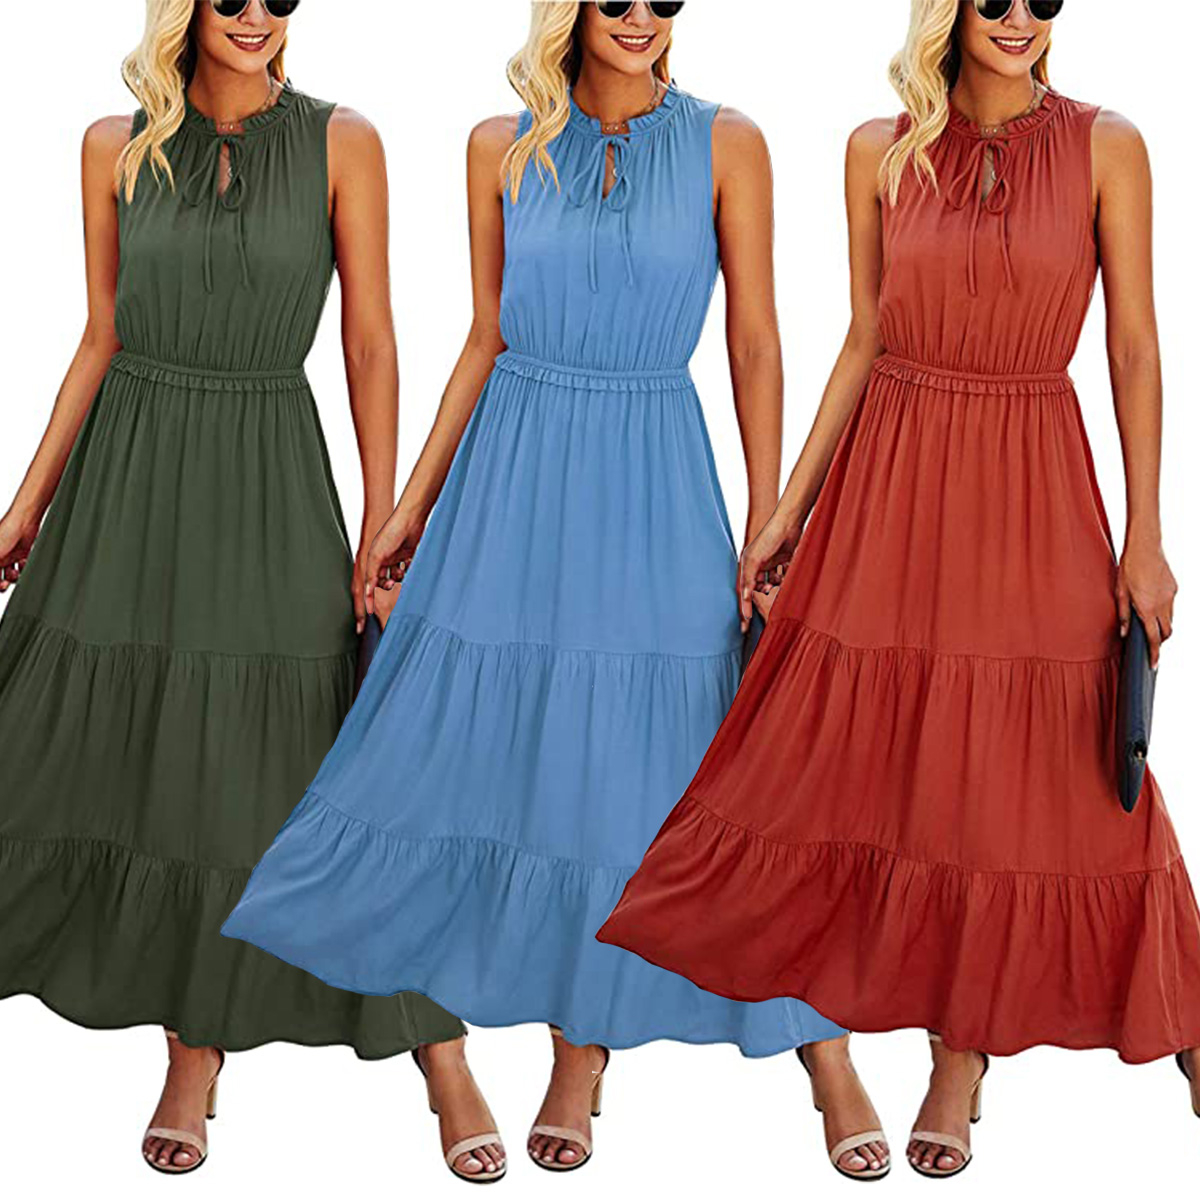 This Stylish Maxi Dress Has Thousands of Glowing Amazon Reviews